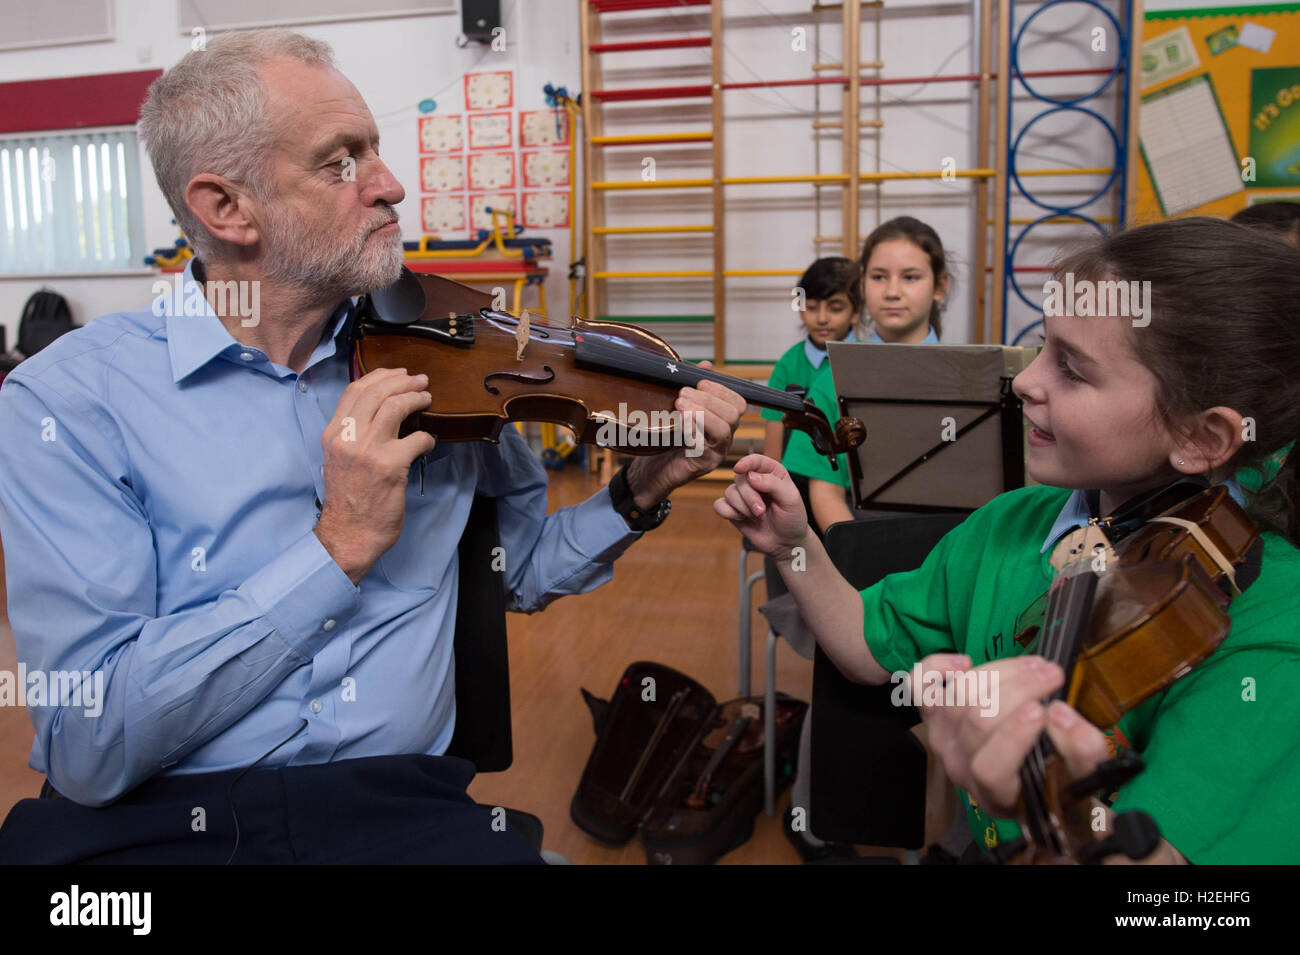 Labour leader Jeremy Corbyn is given a violin lesson by 10 year old Jessica Kelly during a visit to Faith Primary School in Liverpool, where he met children taking part in the In Harmony project, which is supported by the Royal Liverpool Philharmonic Orchestra and is helping school children learn to play musical instruments. Stock Photo